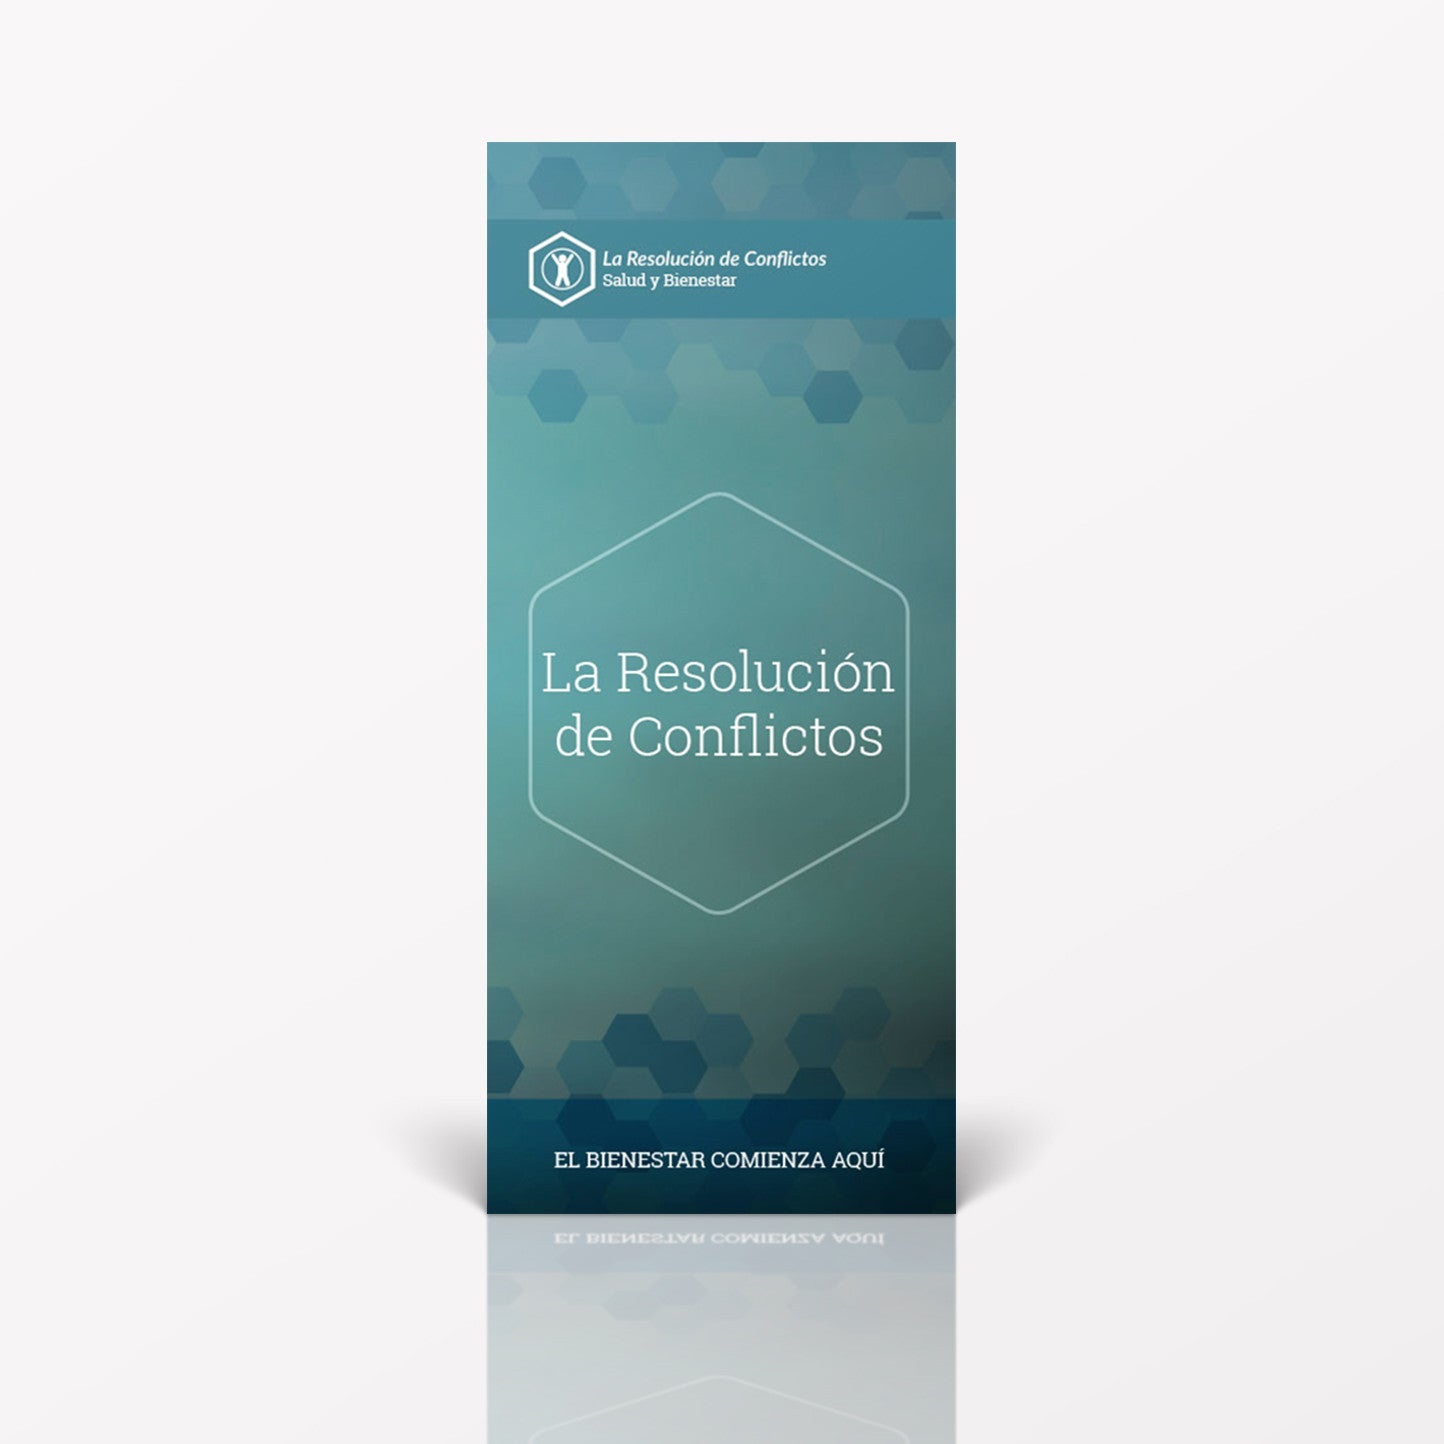 Spanish pamphlet on Conflict Resolution